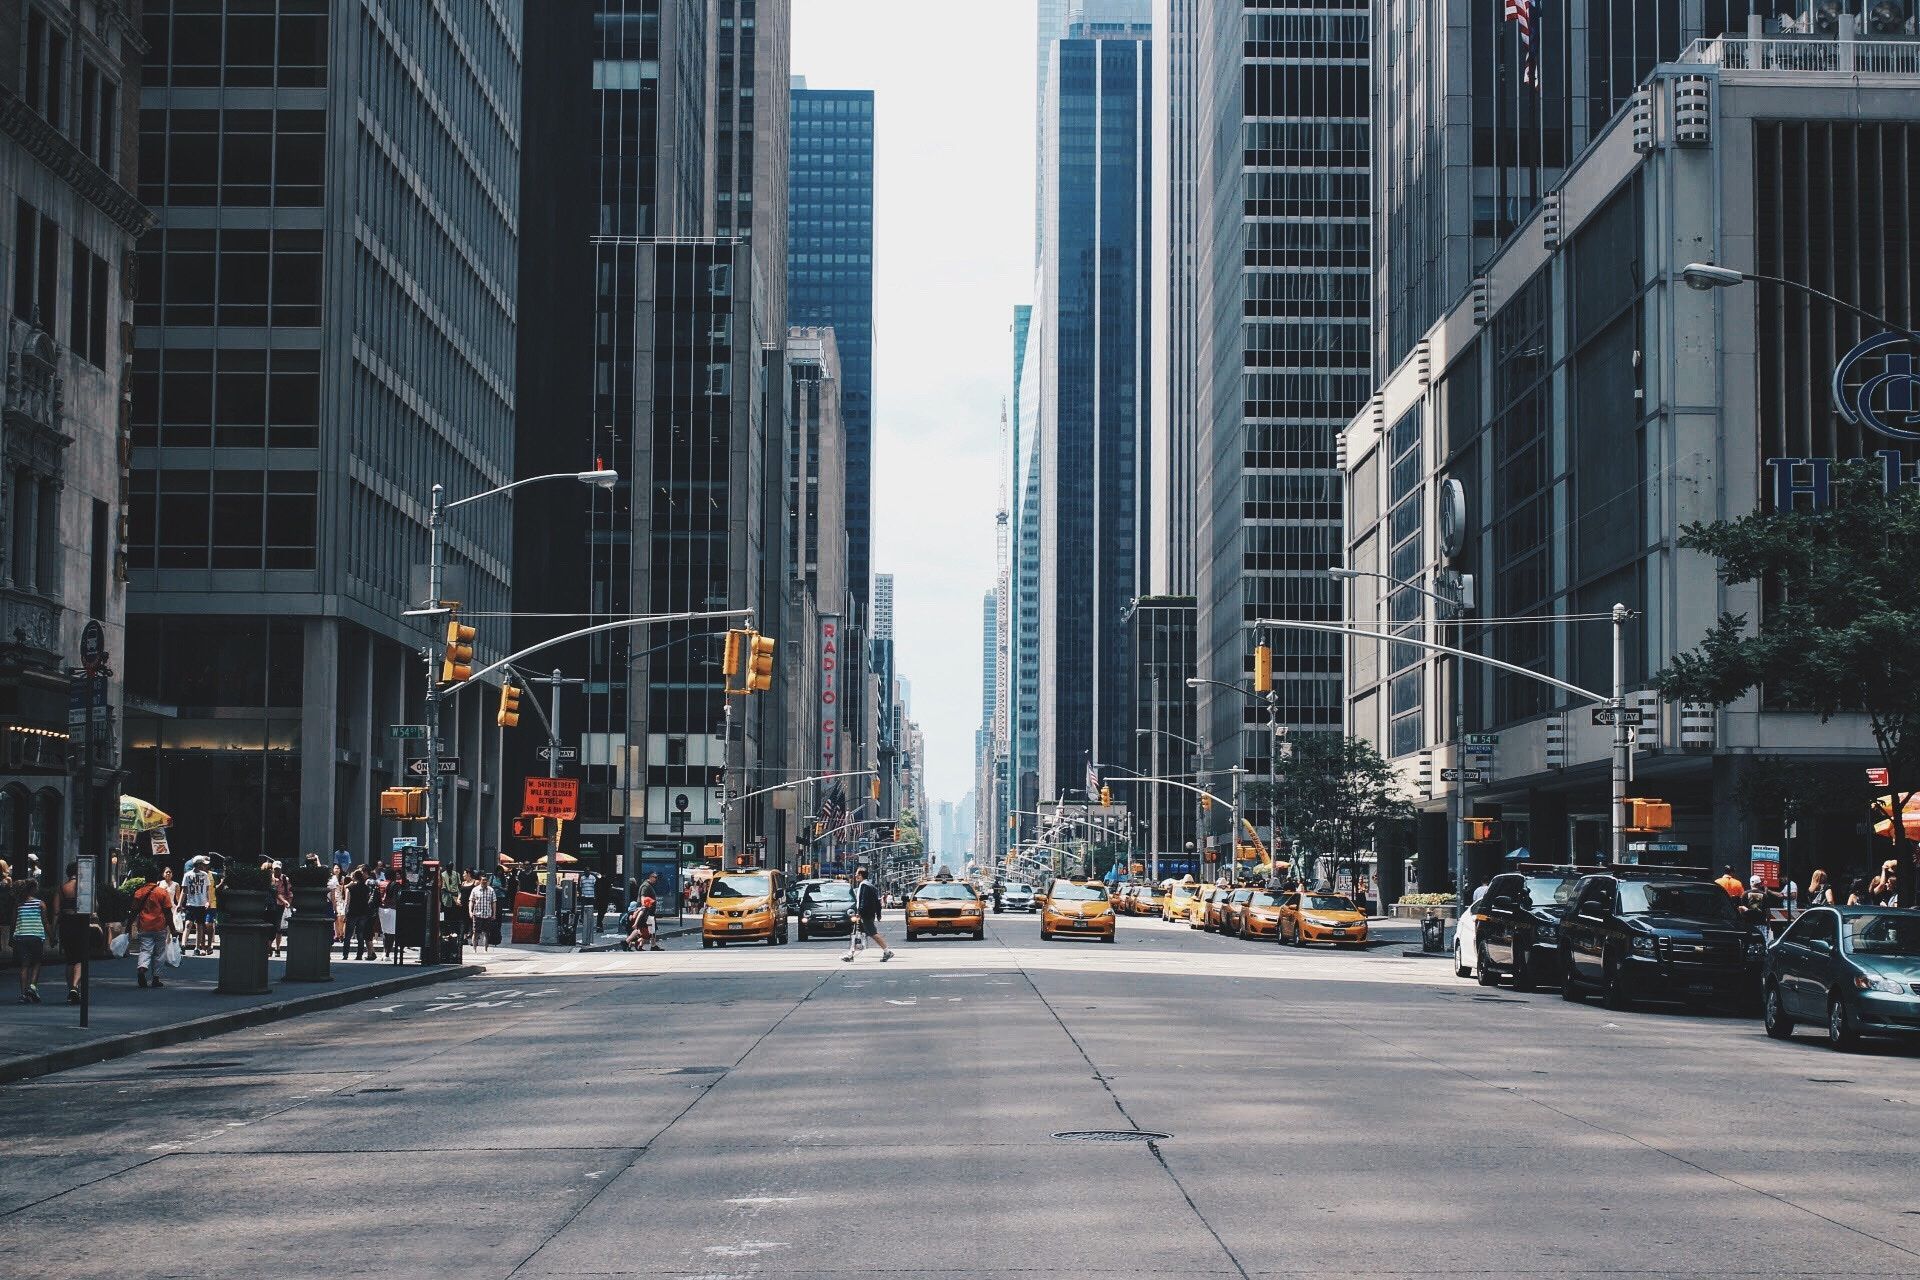 1920x1280 street, highrise, aesthetic, building, taxi, new york, person, skyscaper, Free , car, intersection, streetlight, canyon, city, skyscraper, cityscape, urban, blue, traffic, traffic light, road Gallery HD Wallpaper